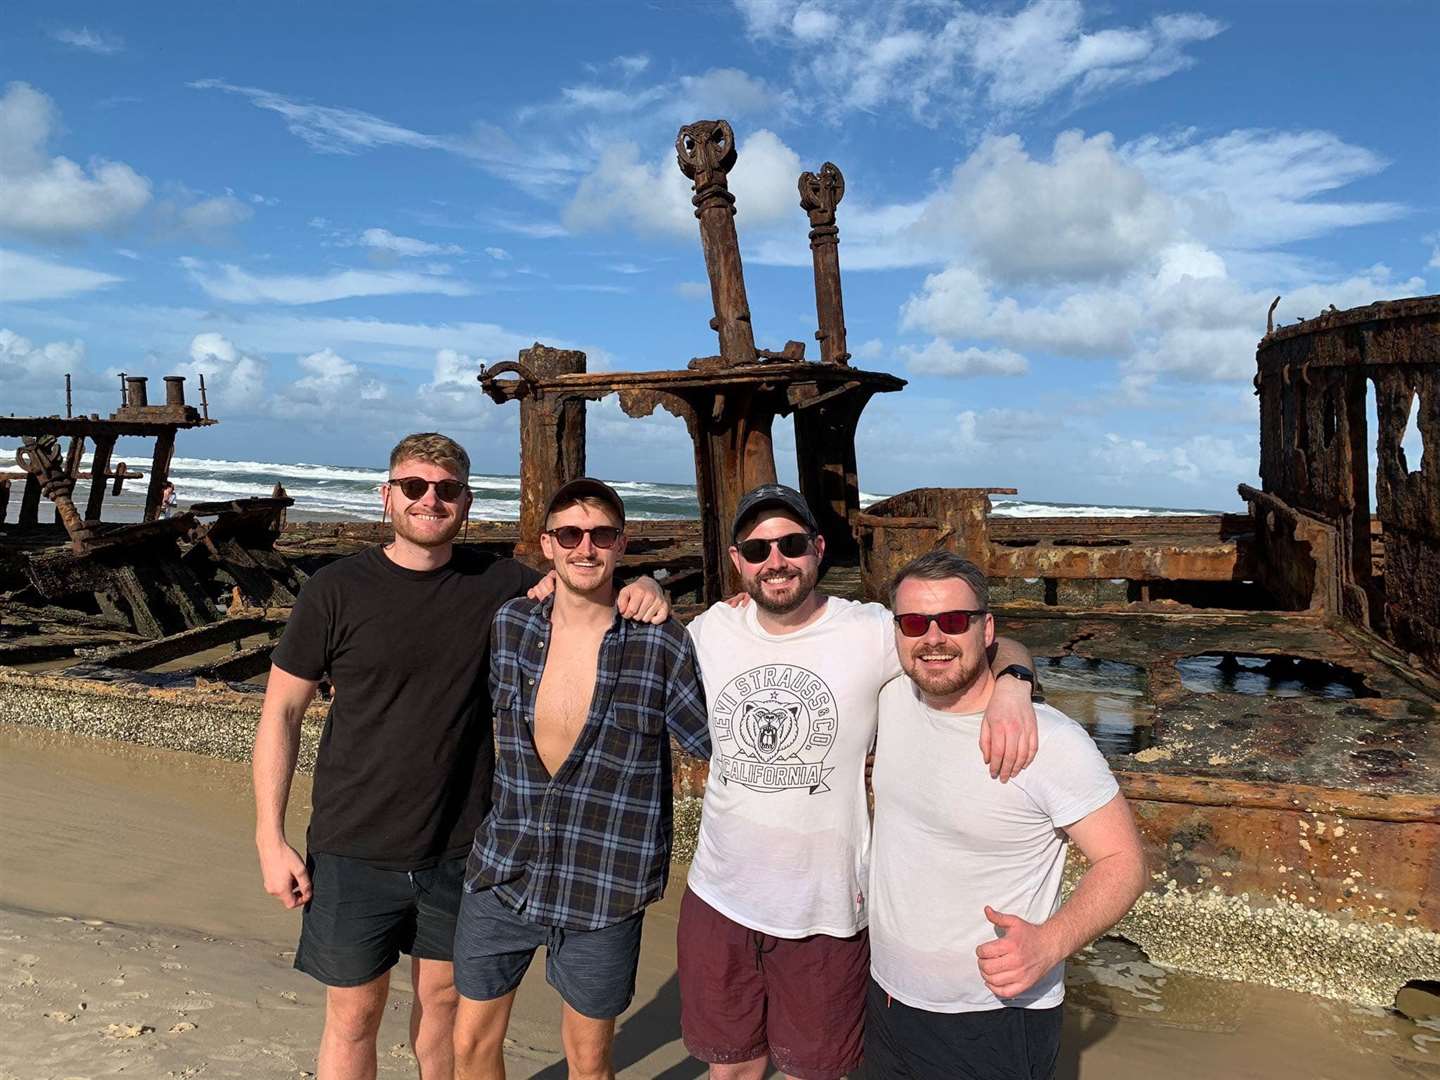 Liam Minnock (second from right) was due to return to Britain after a two-week holiday in Australia today